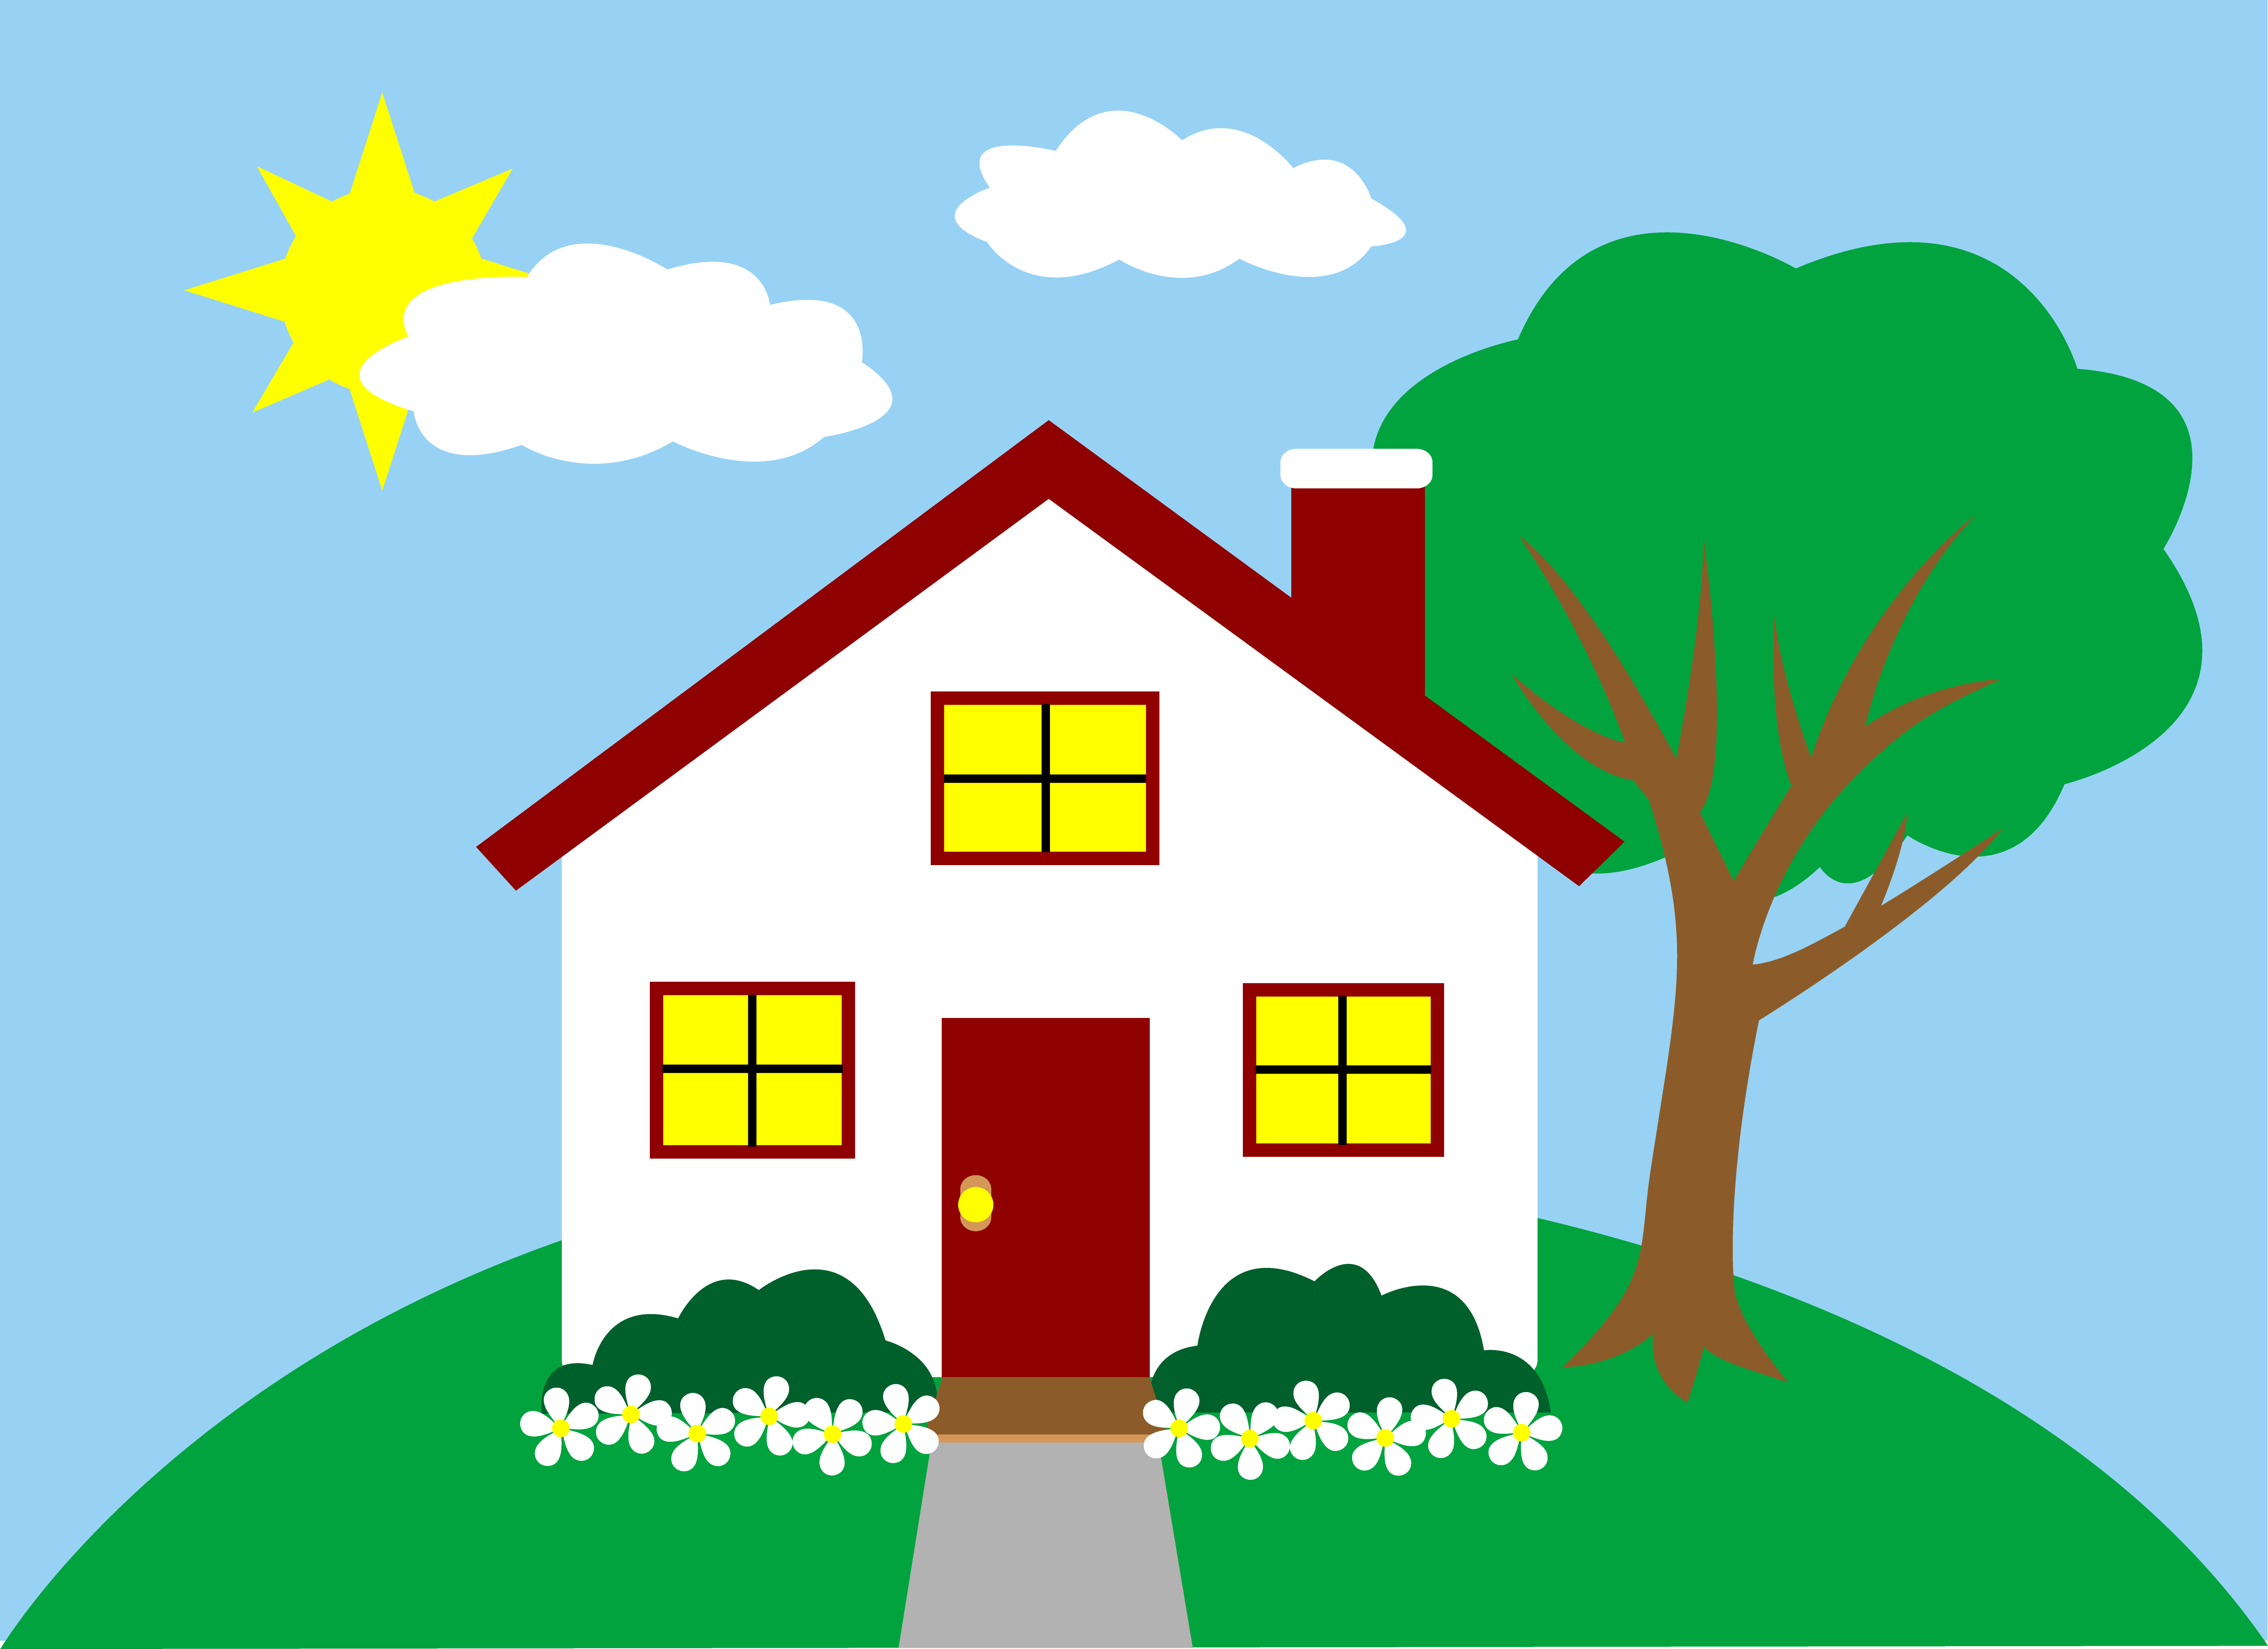 Clipart House Free | Clipart Panda - Free Clipart Images